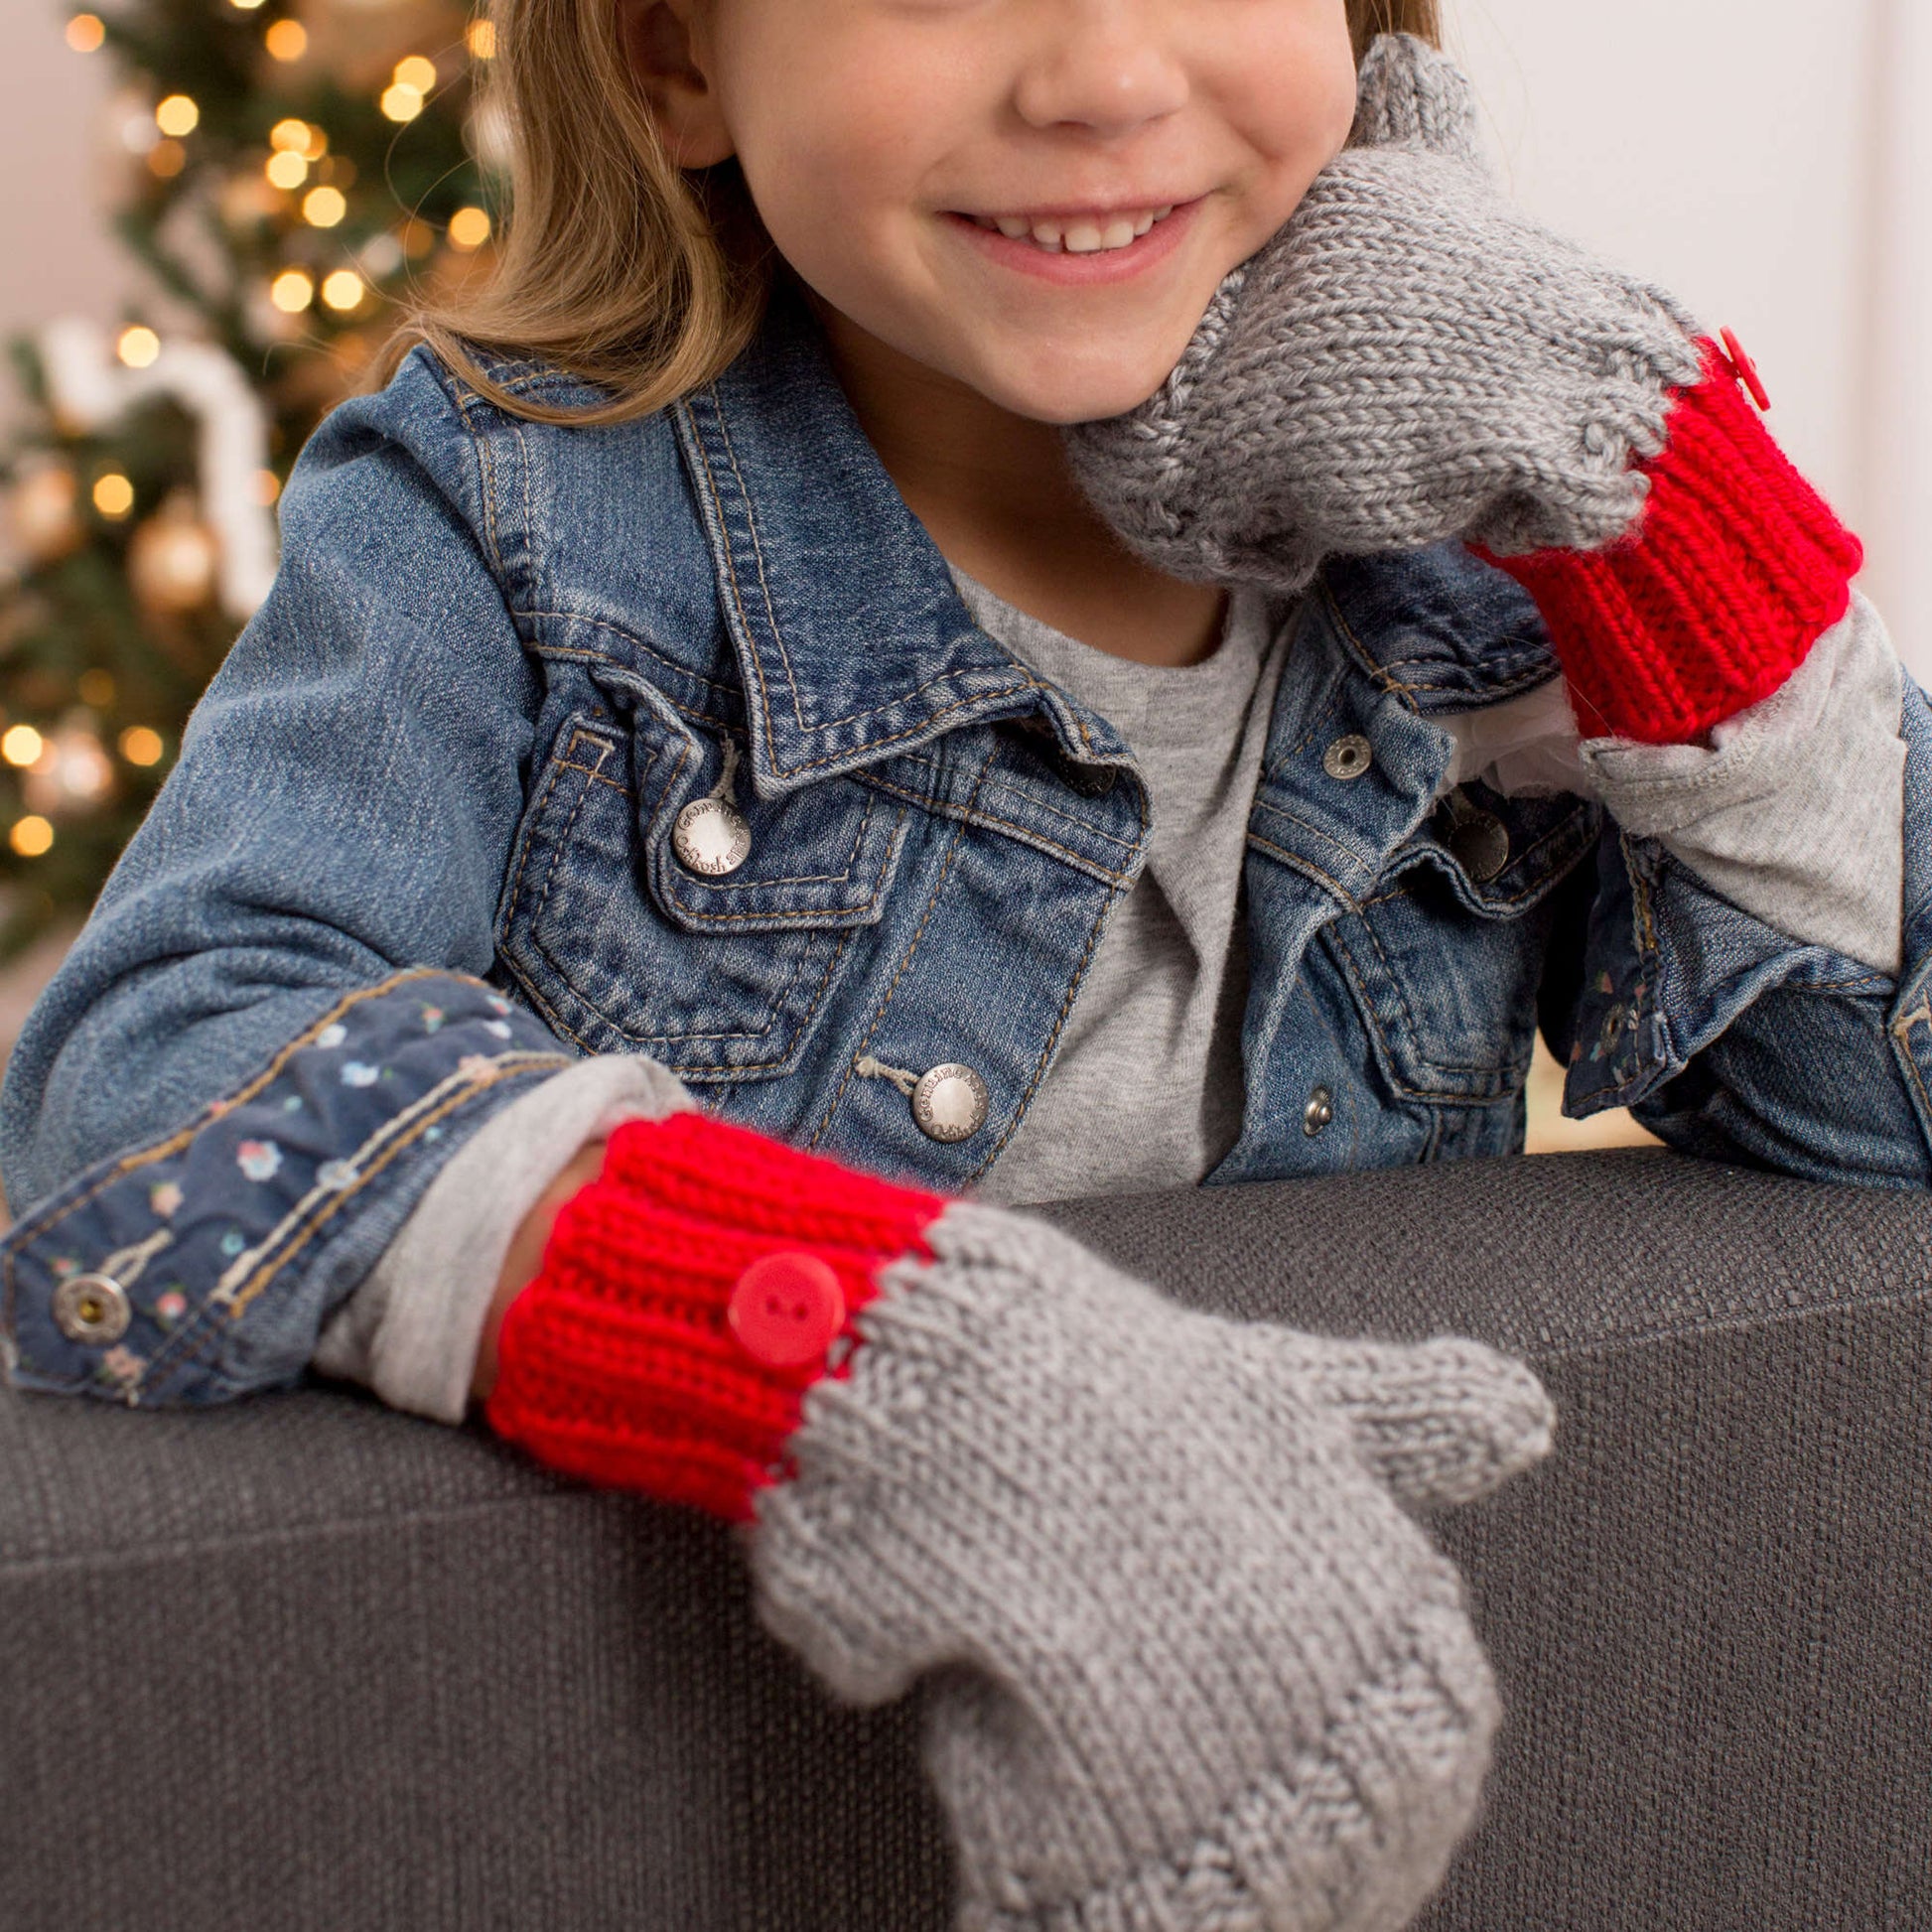 Fingerless Gloves and Flip Mitts – FREE Knitting Patterns